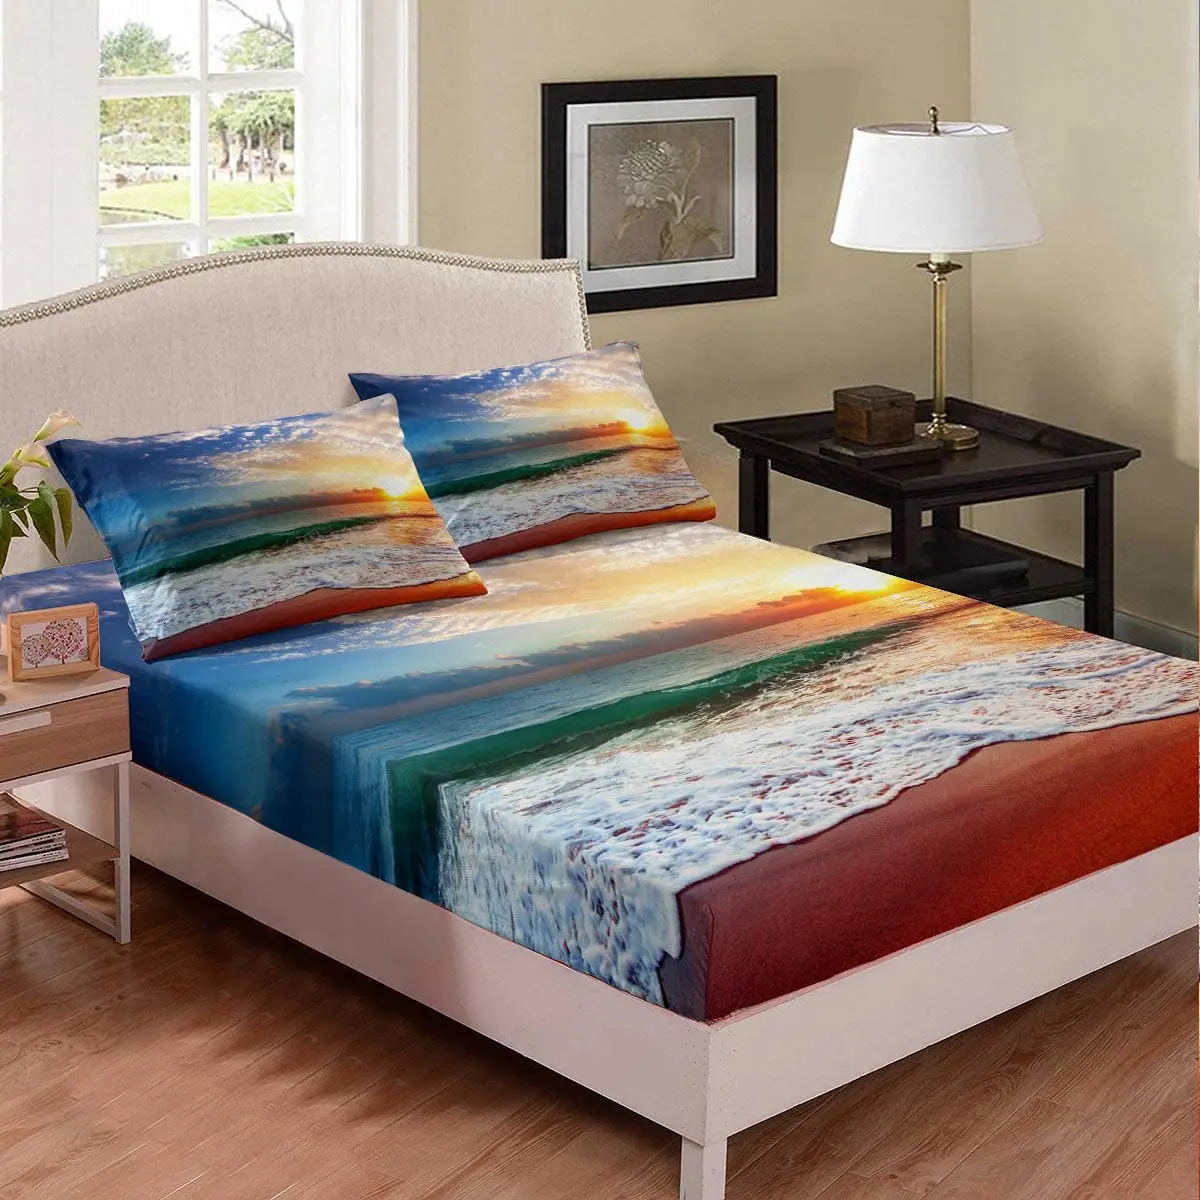 

Ocean Beach Fitted Sheet Full Size Sunset Bed Sheet Set Coastal Nature Theme Bed Cover for Kids Boys Girls Hawaiian Bedding Set